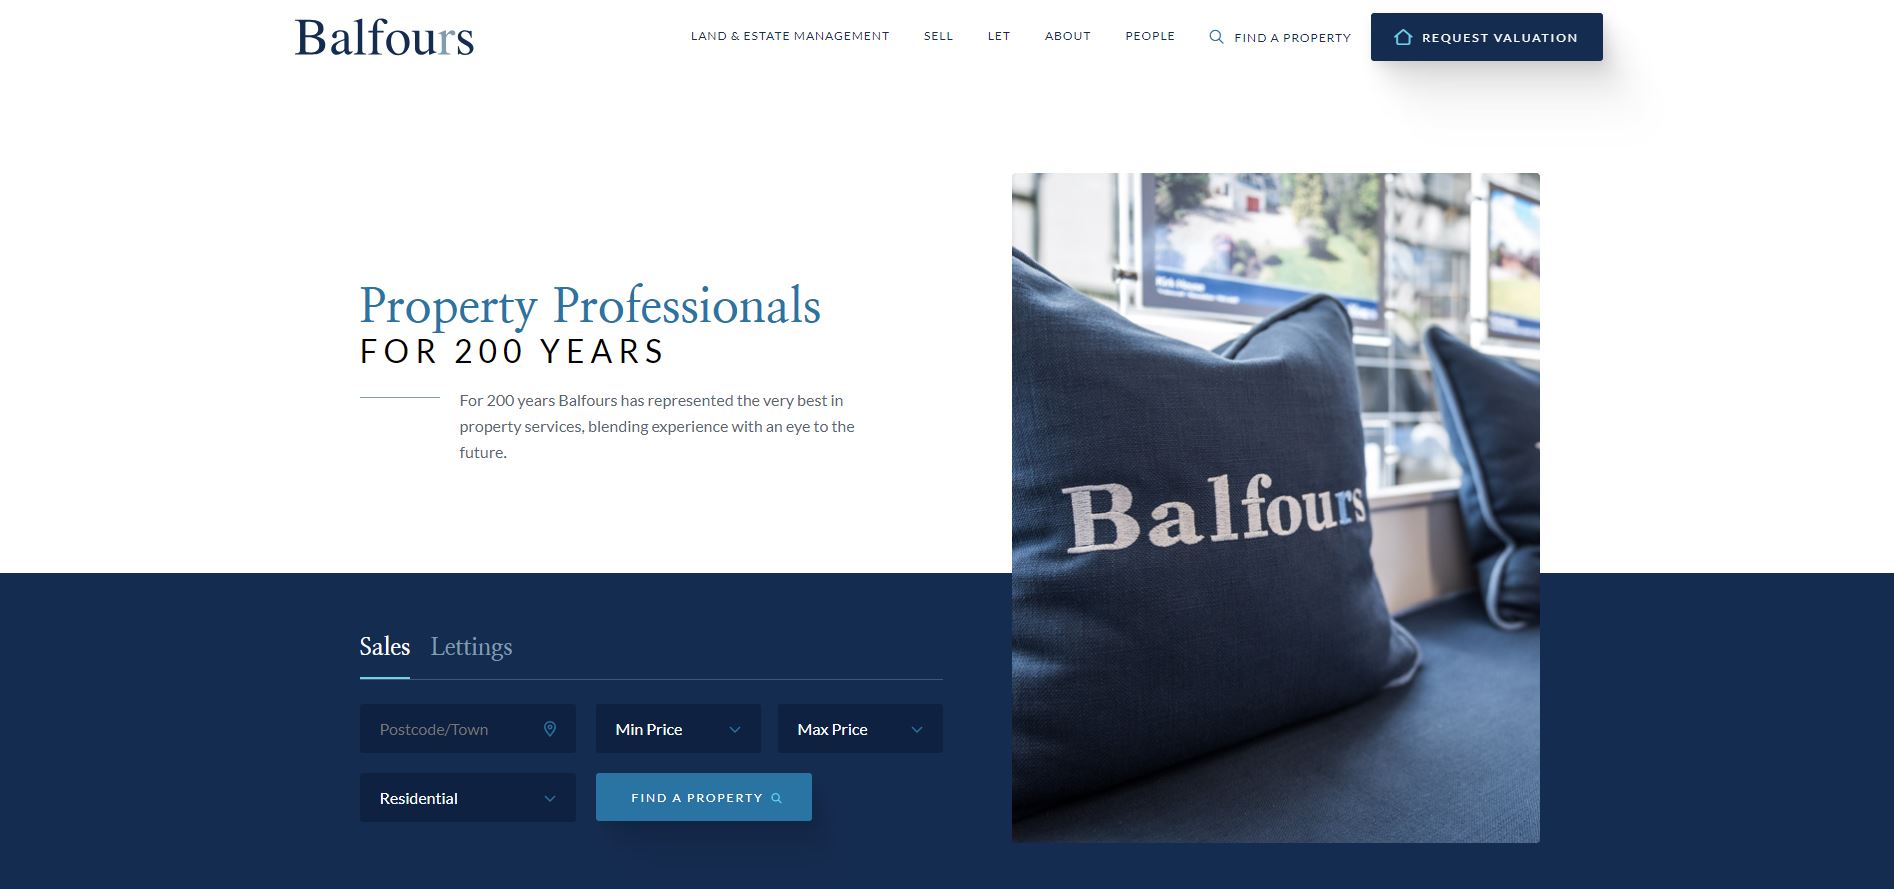 New website for Balfours